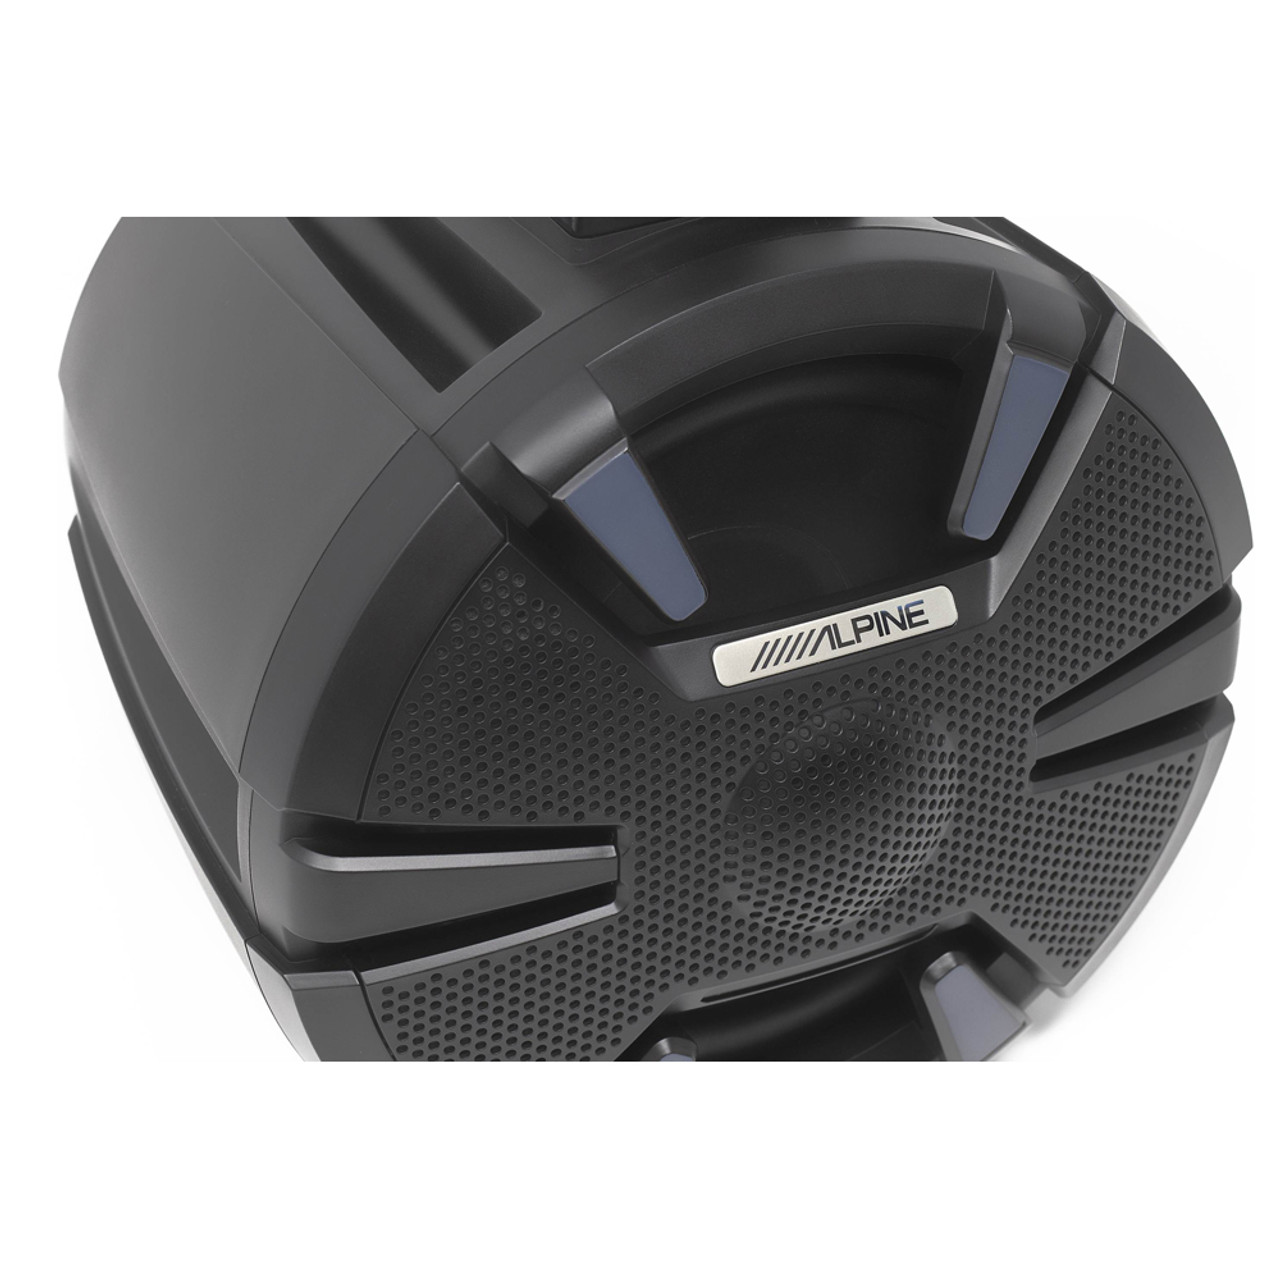 Alpine PSS-SX01 Side-by-side Sound System: includes Two 6-1/2" Speaker Bluetooth Controller, and a 4-channel Amplifier